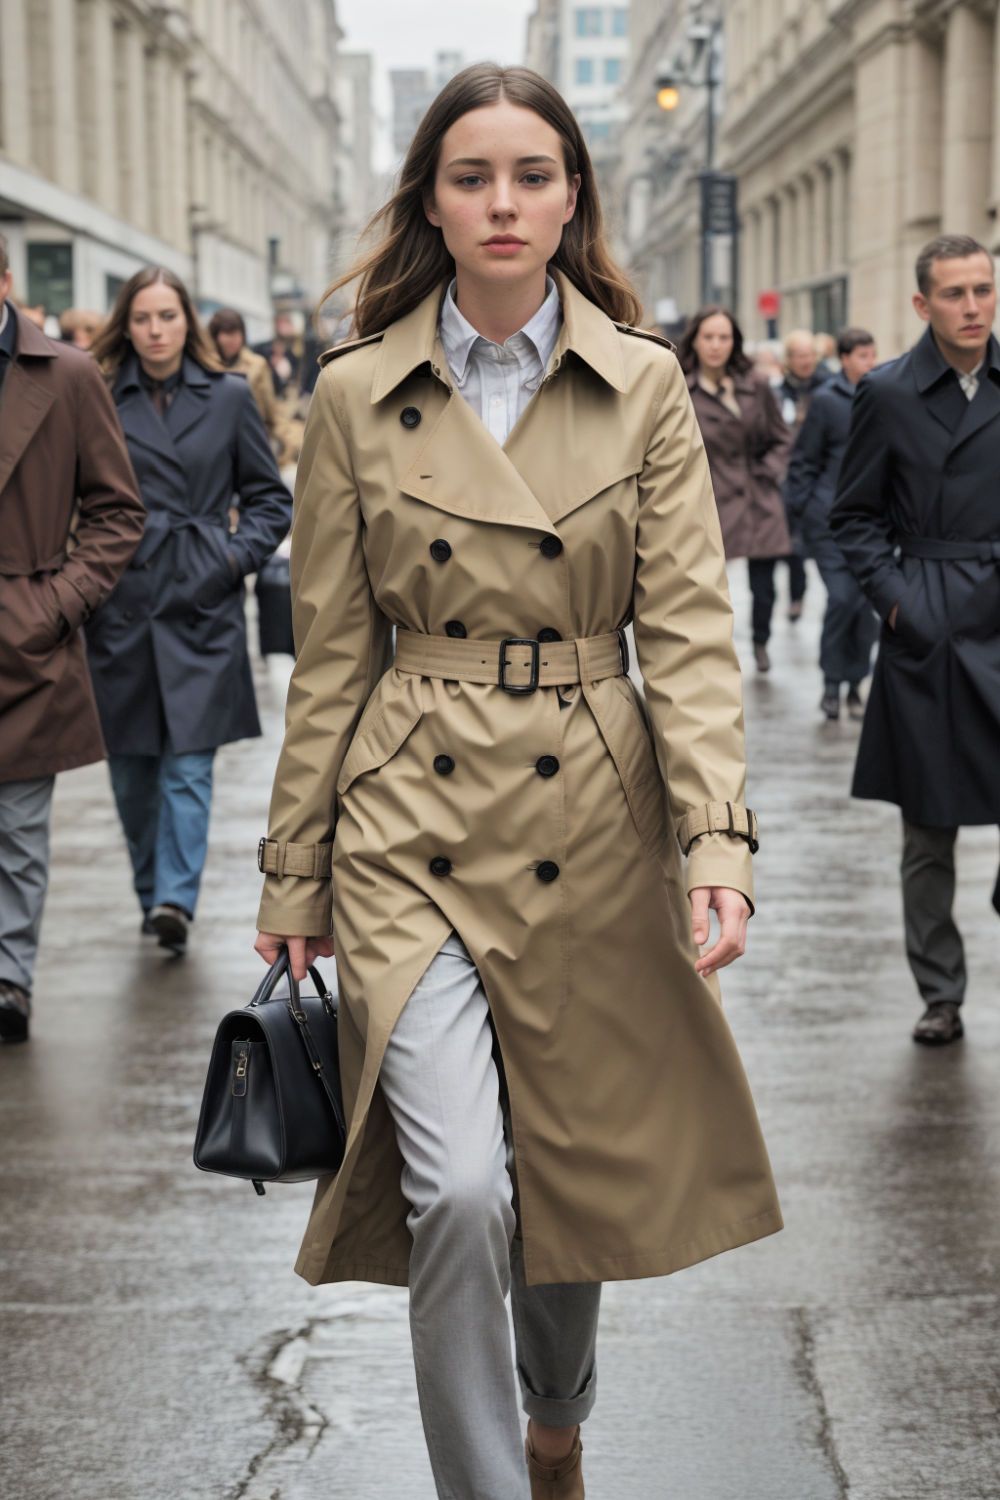 classic trench coats